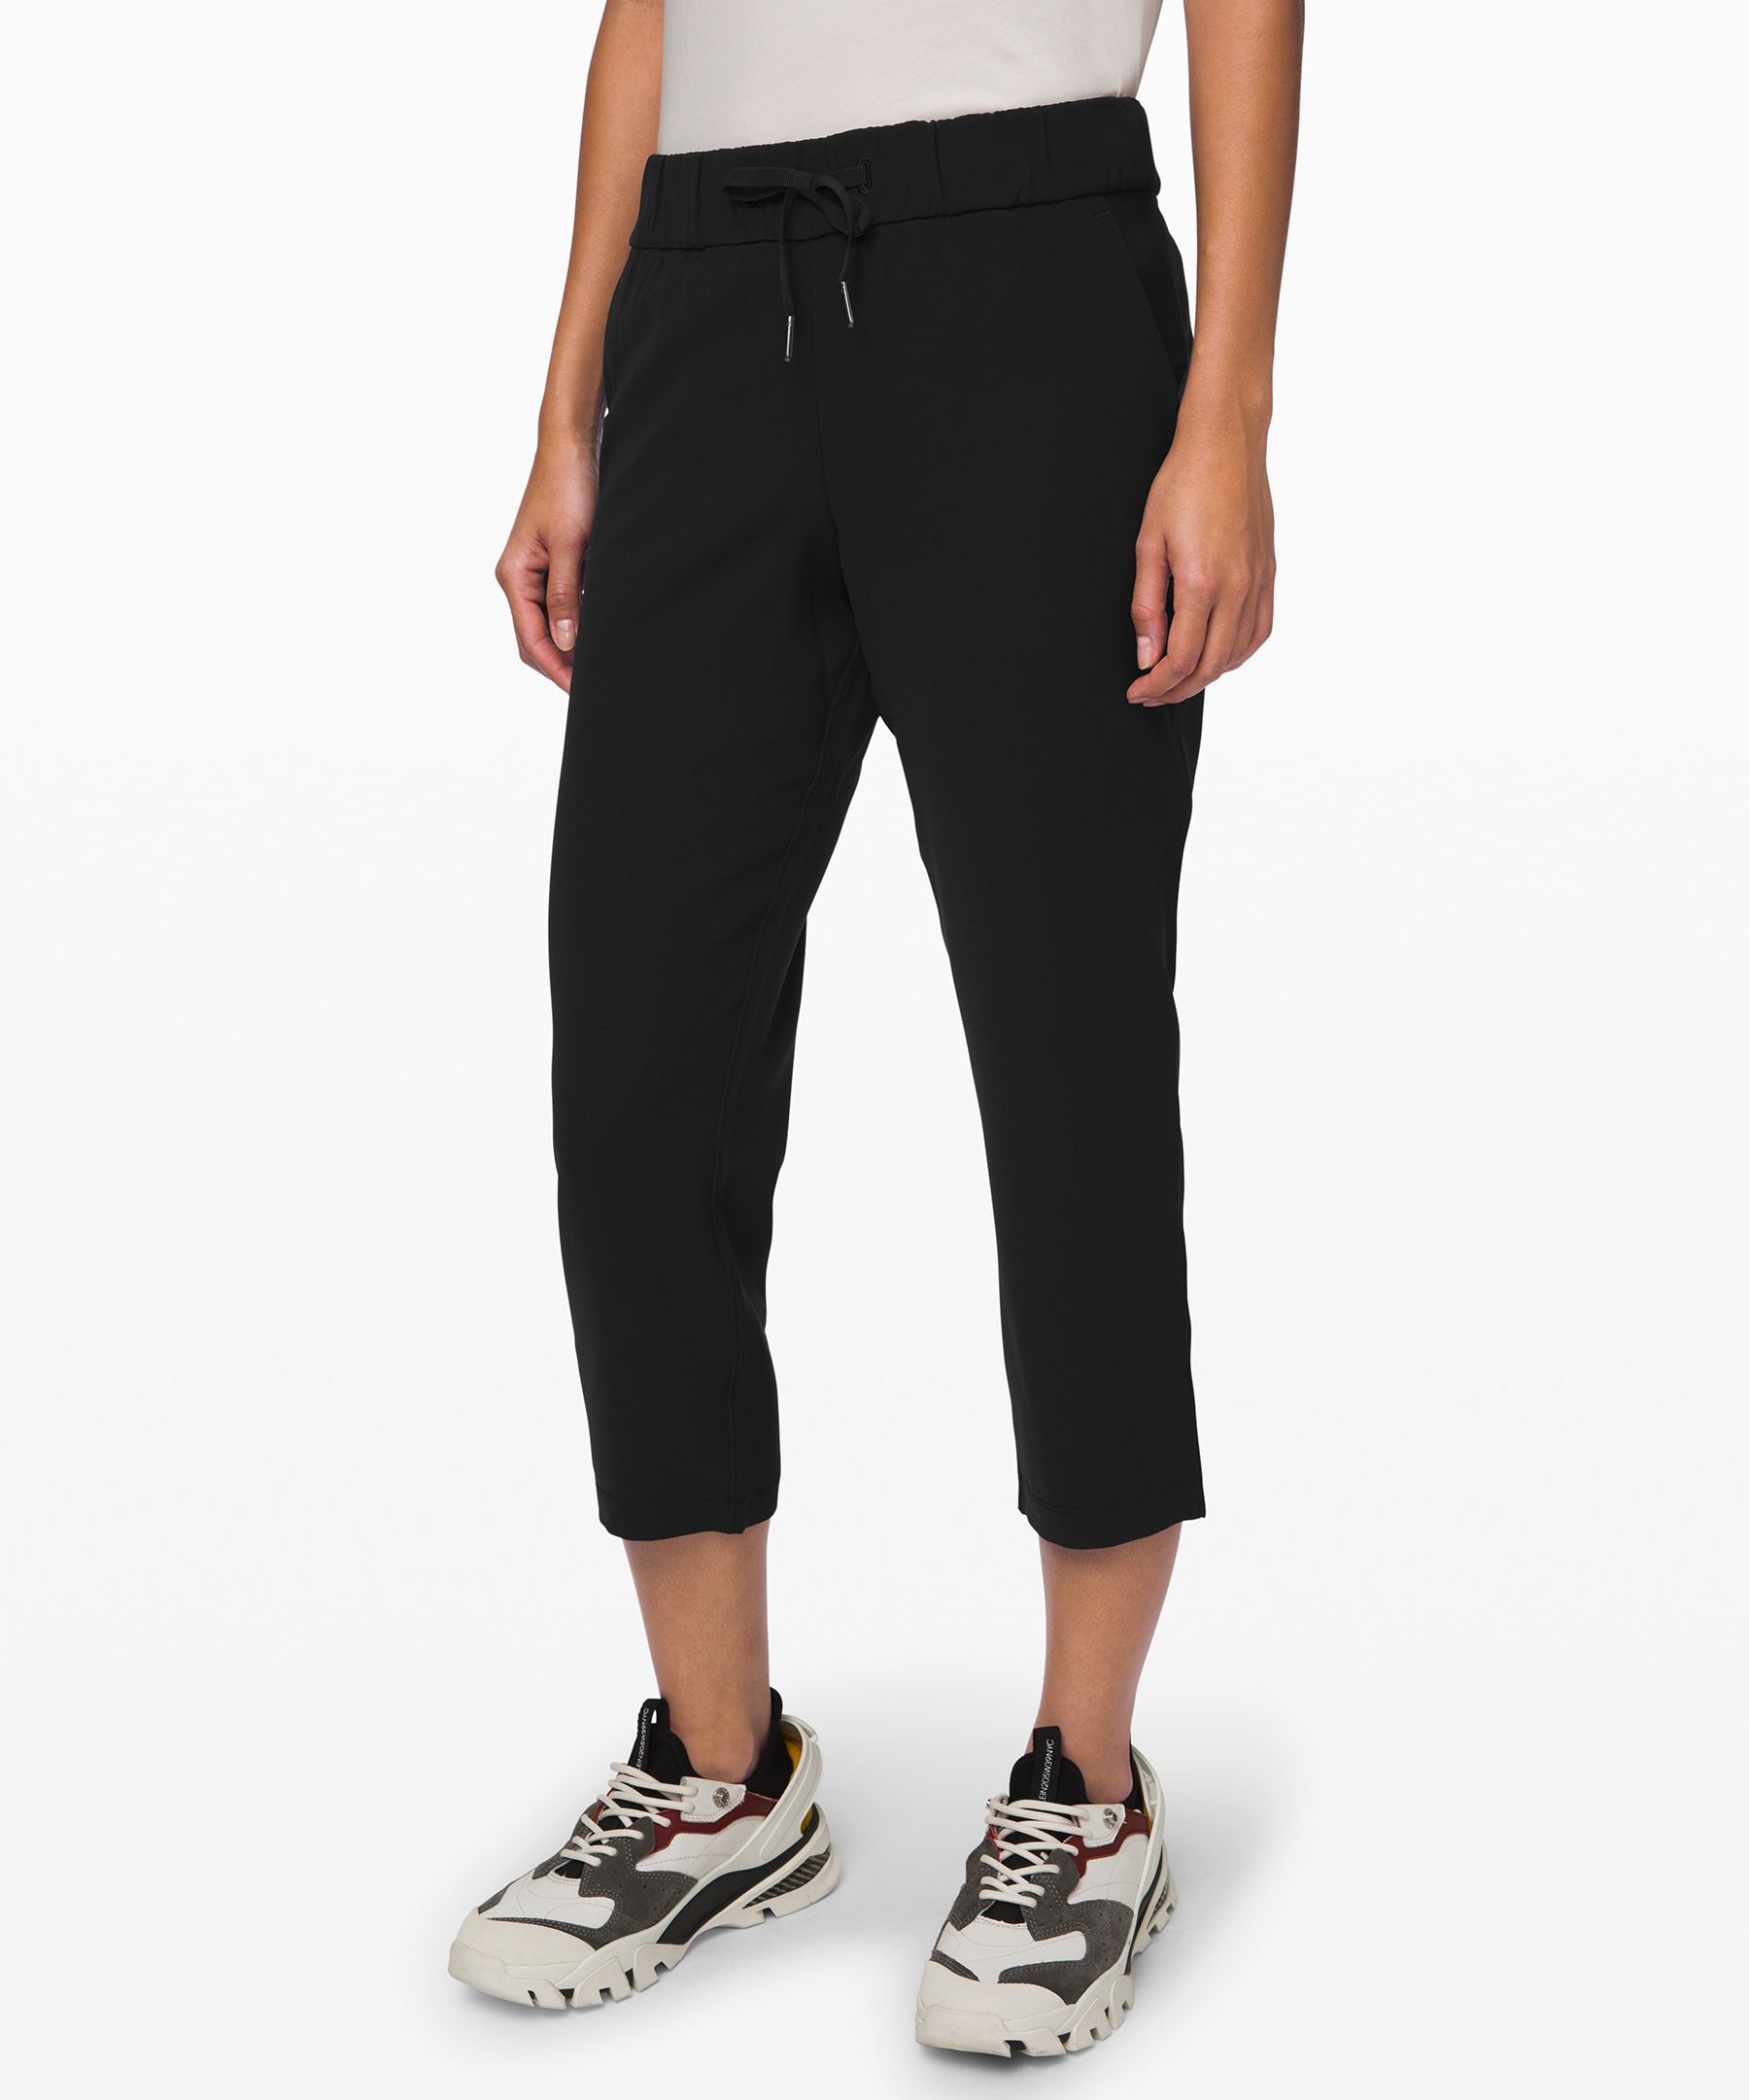 lululemon on the fly pant woven review